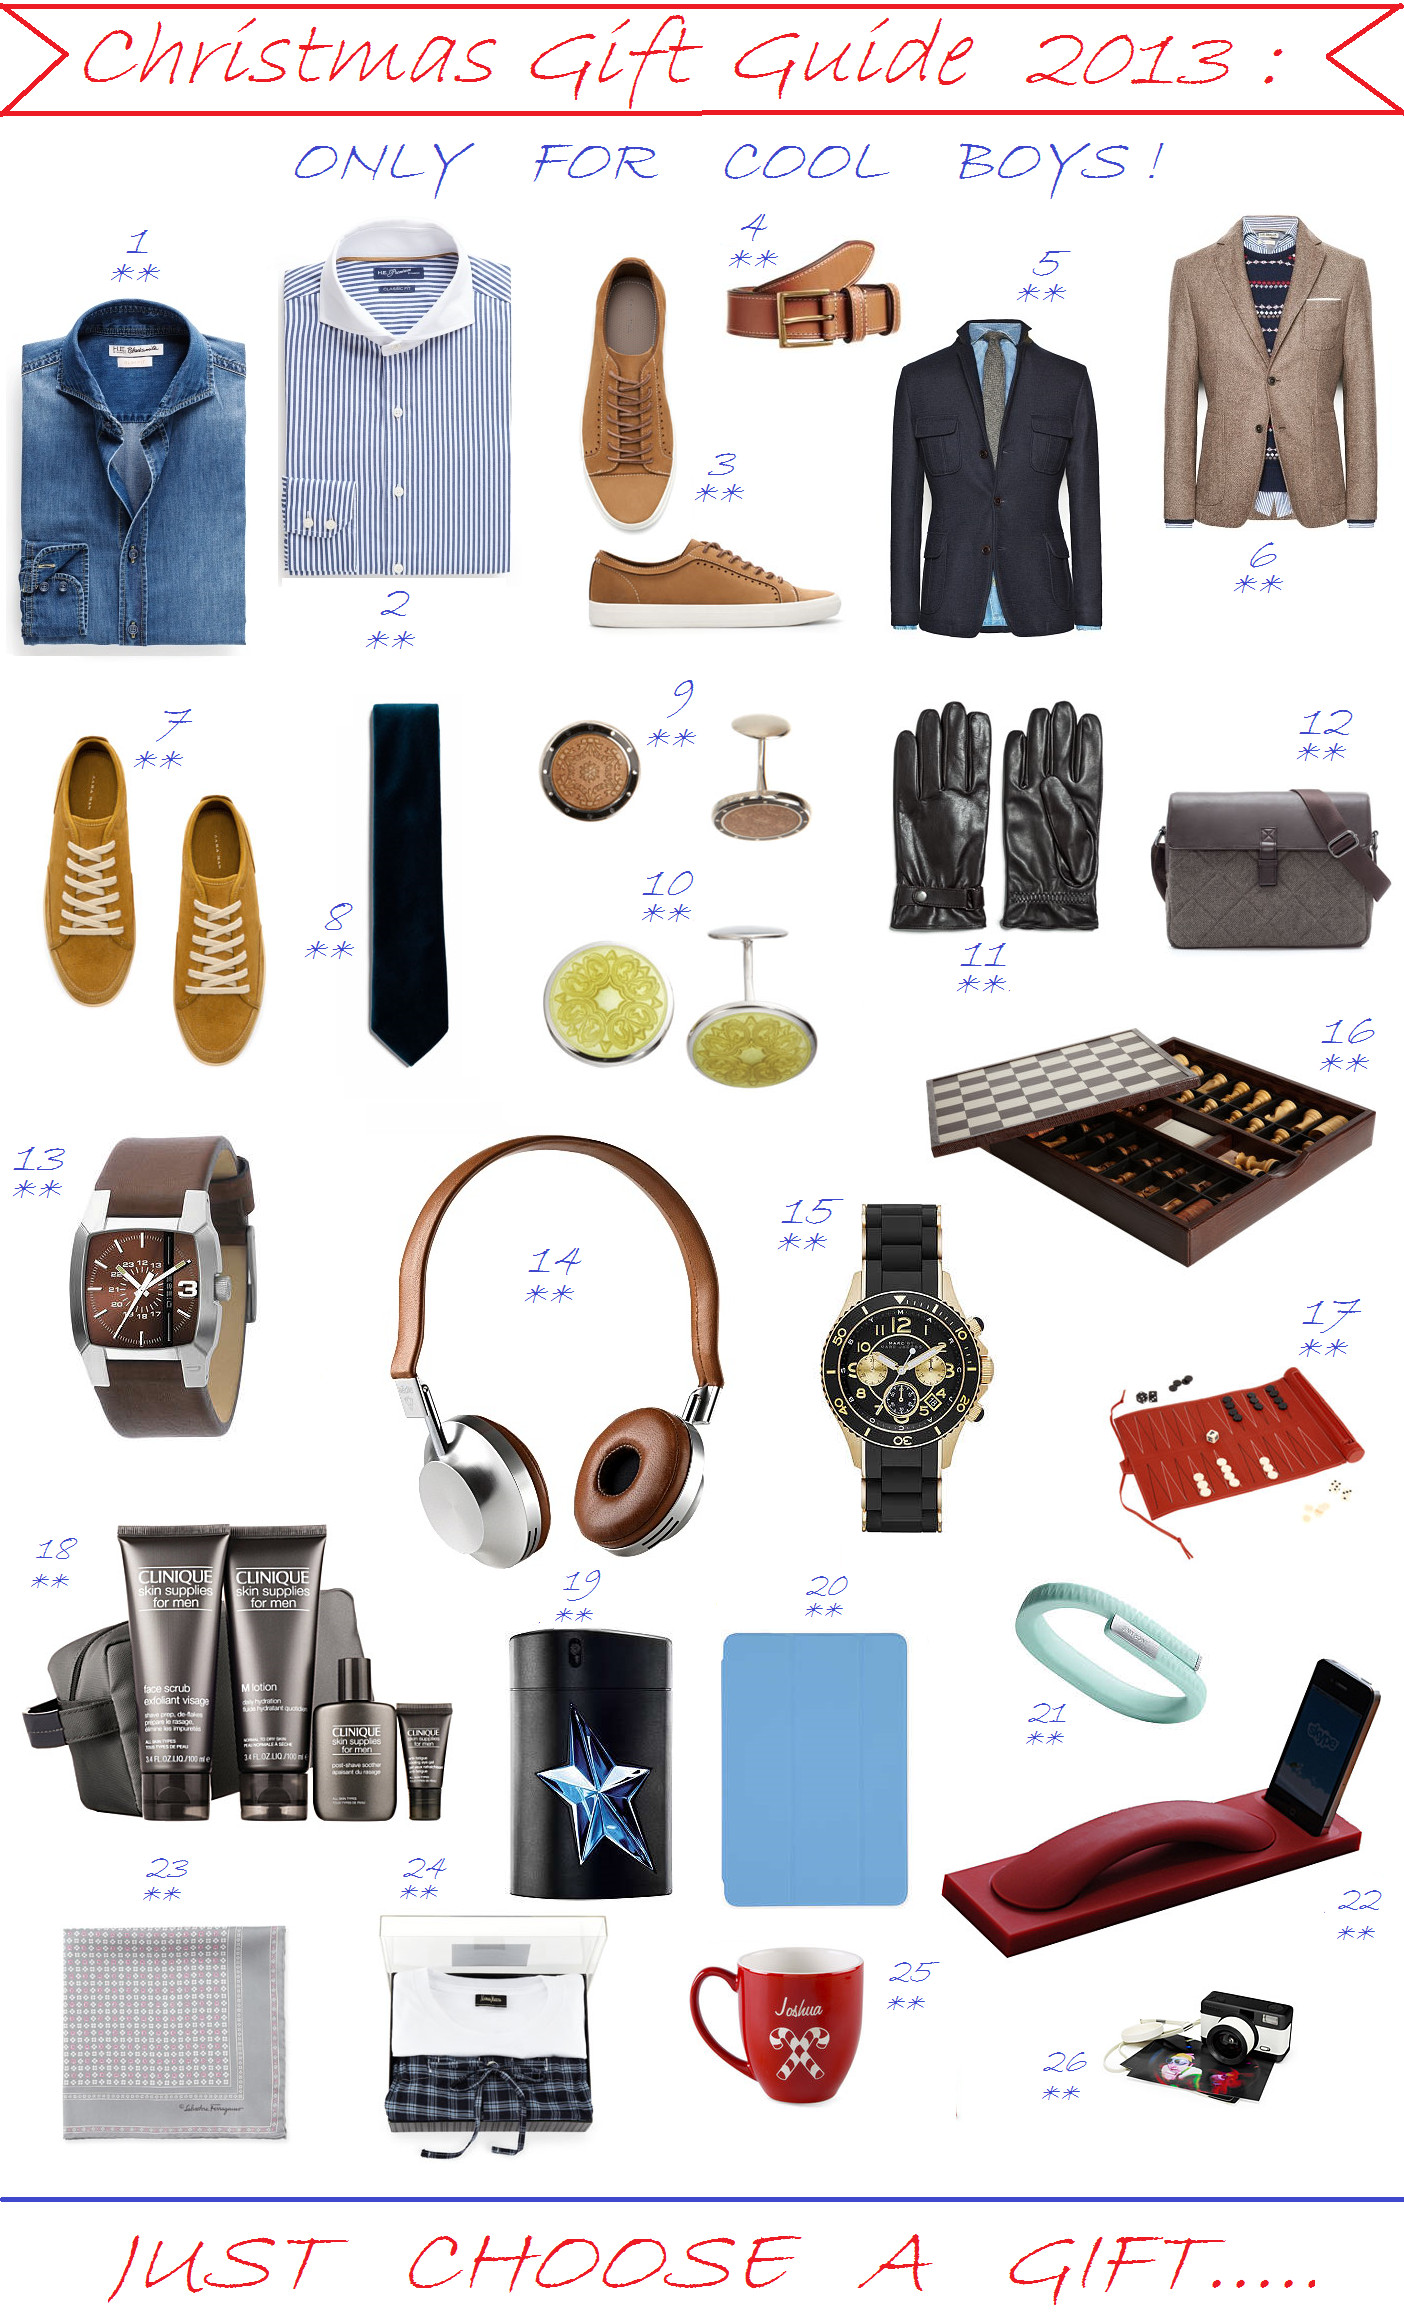 Cool Gift Ideas For Boys
 CHRISTMAS GIFT GUIDE 2013 ONLY FOR COOL BOYS